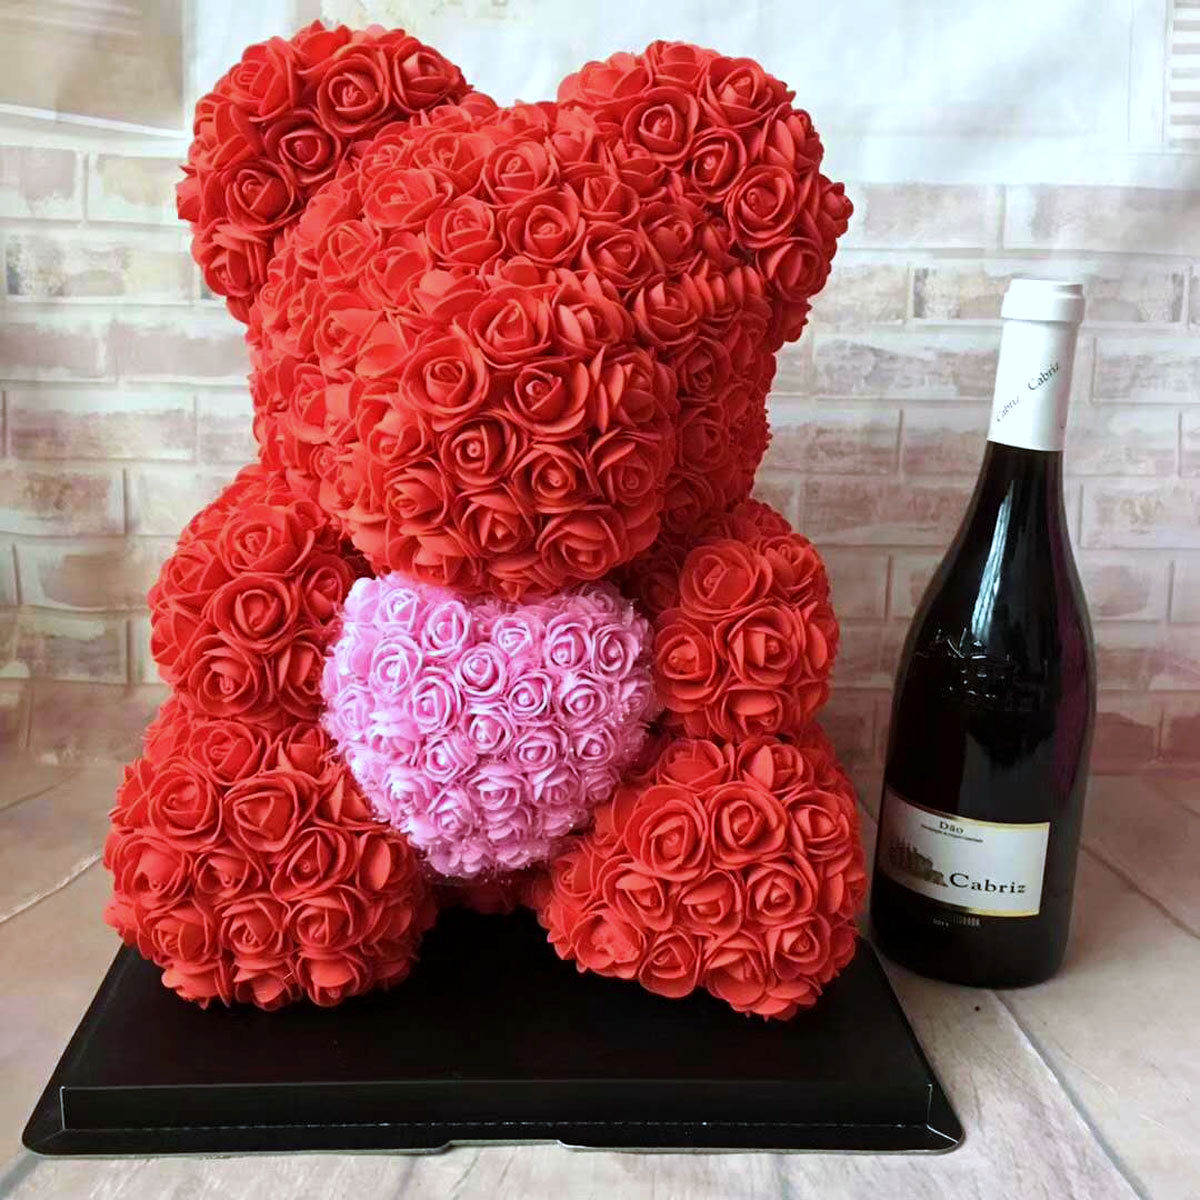 Ideas For Valentines Gift
 9 Wine Valentines Day Gift Ideas for Her